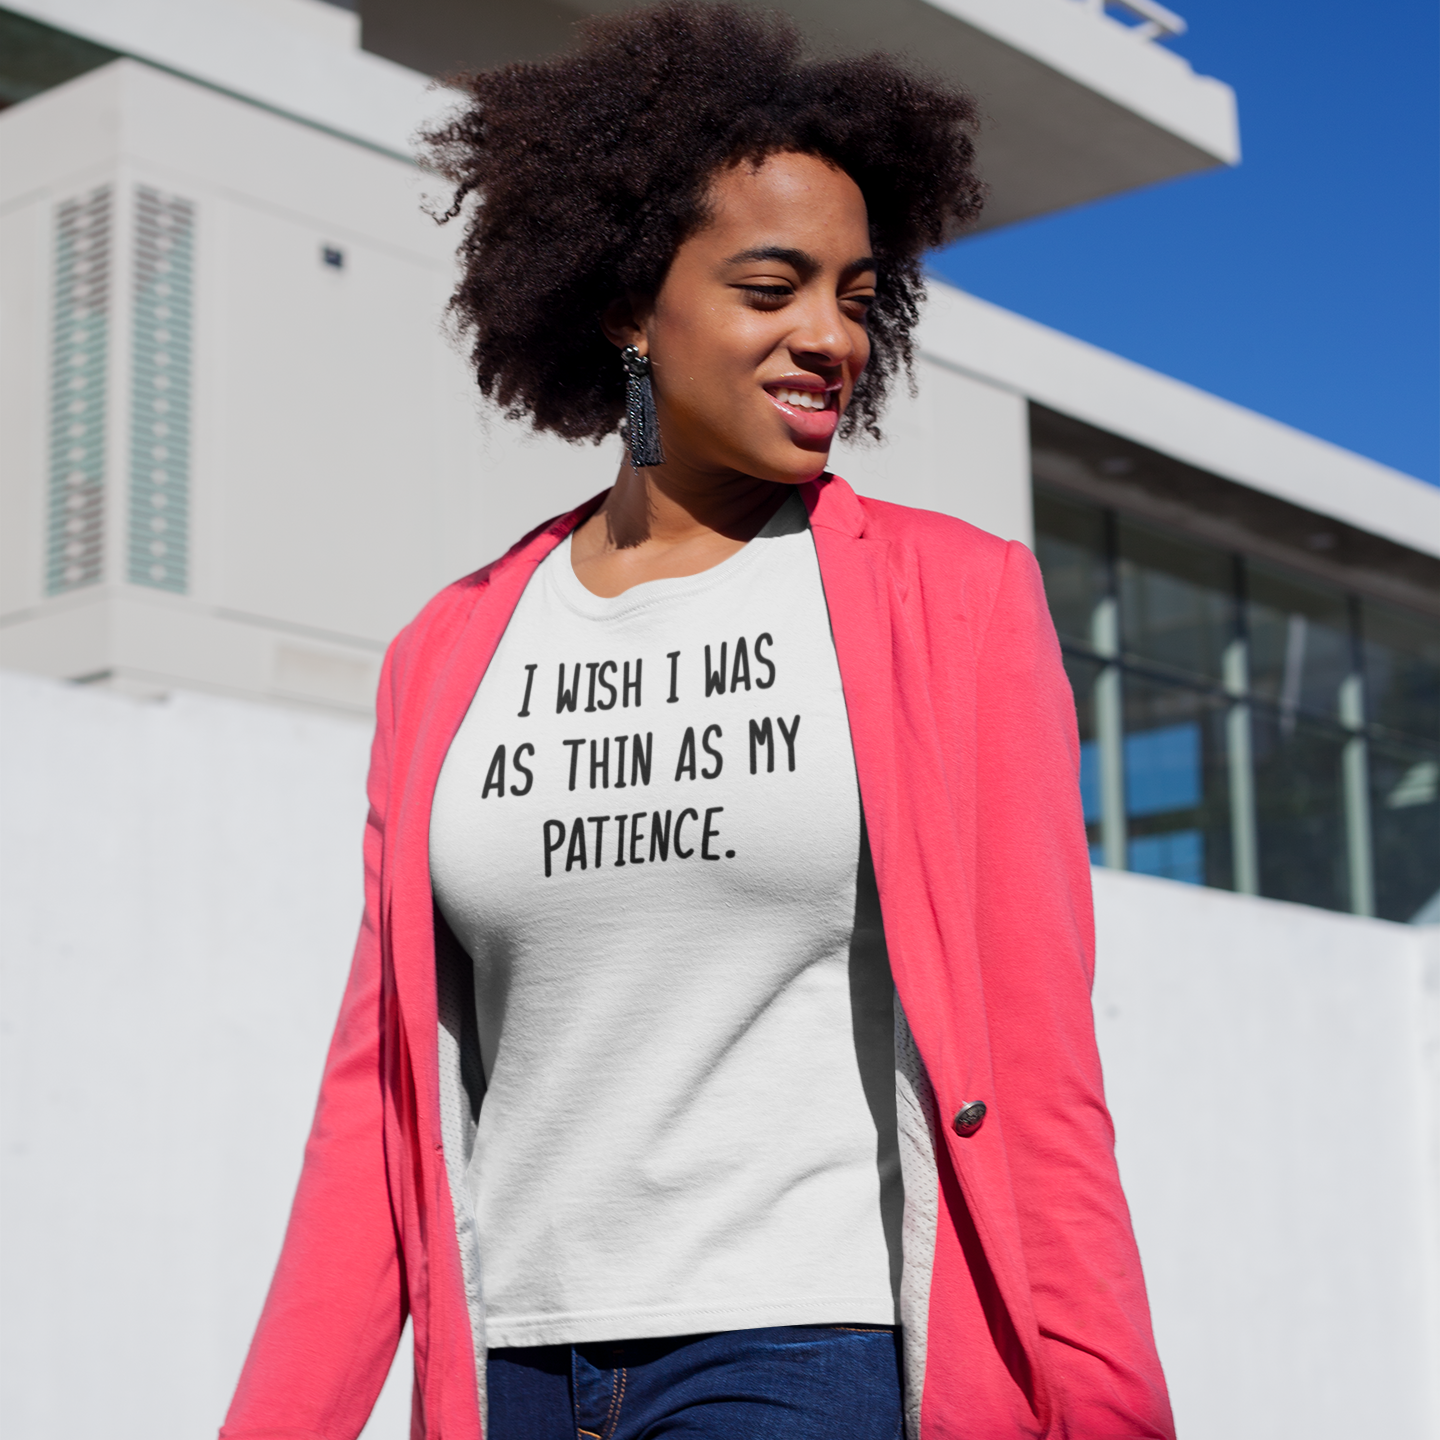 'I wish I was as thin as my patience' volwassene shirt